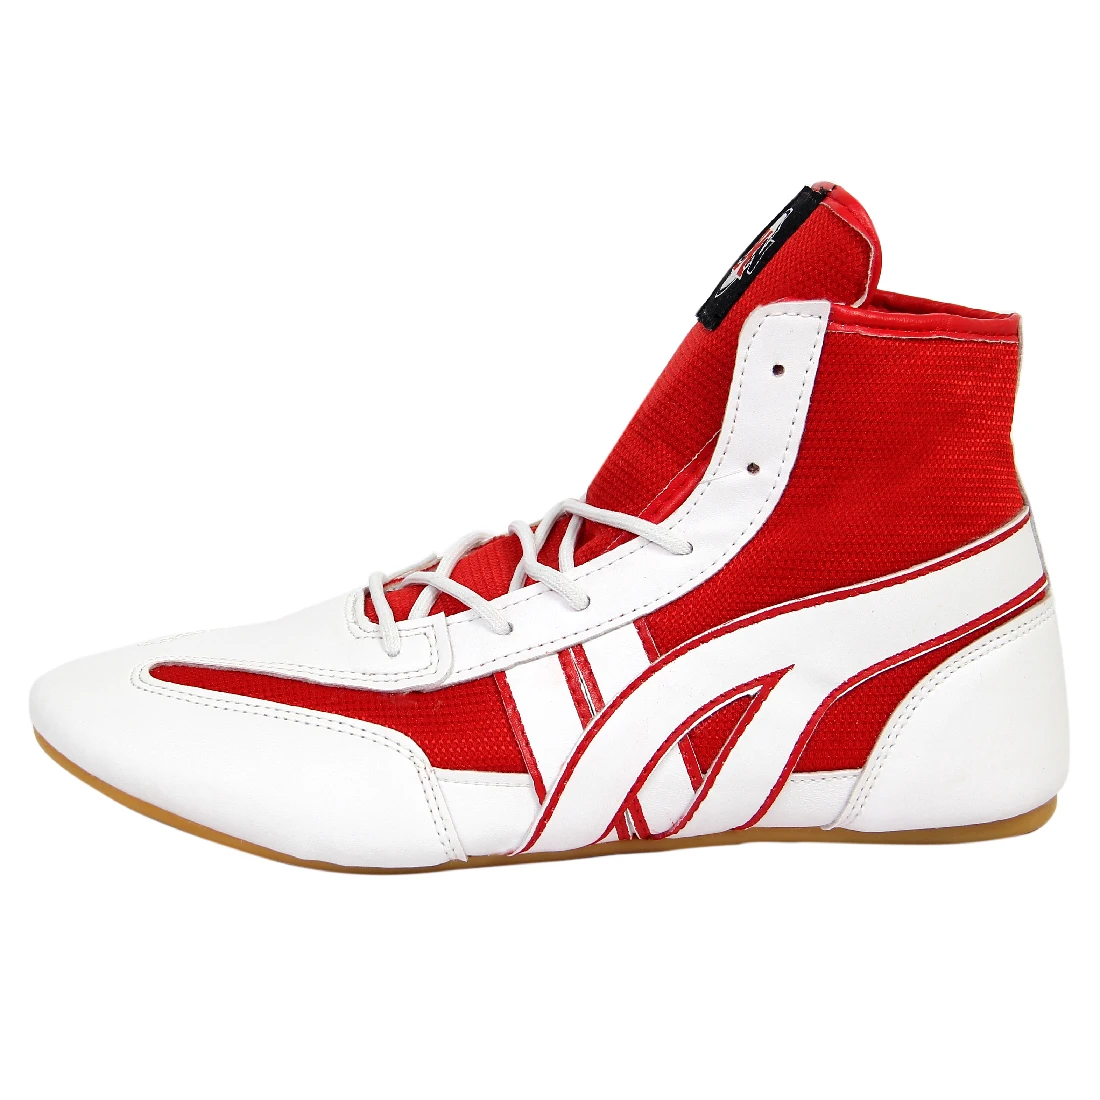 kabaddi mat shoes different size and